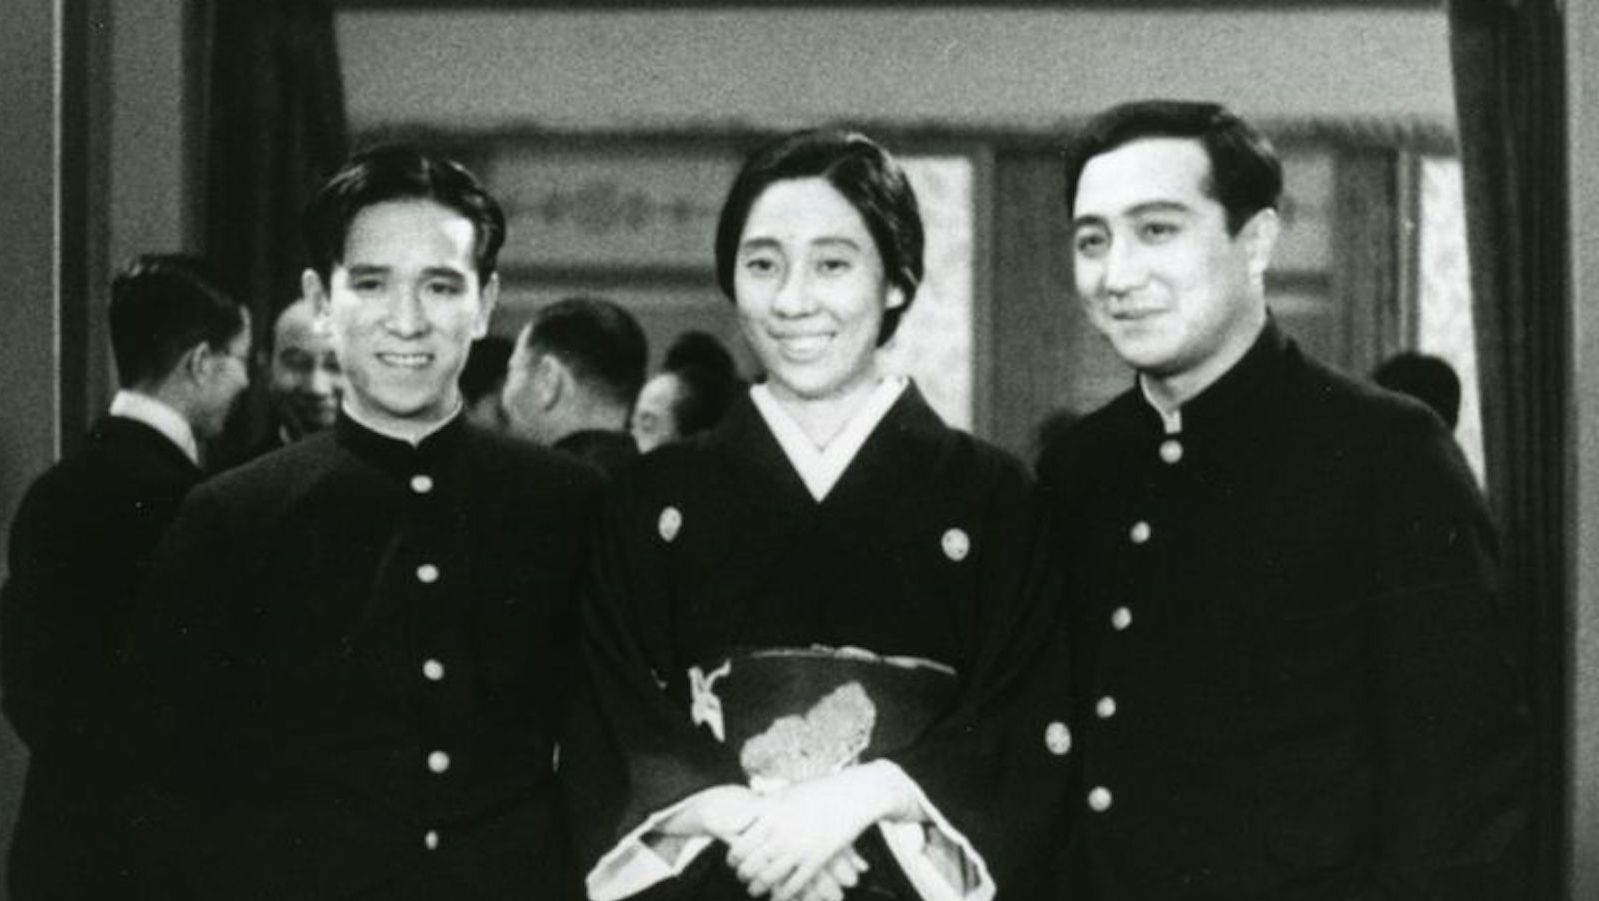 Black and white photo of three Japanese people in uniforms, a woman in the middle and two men on either side, smiling past the camera